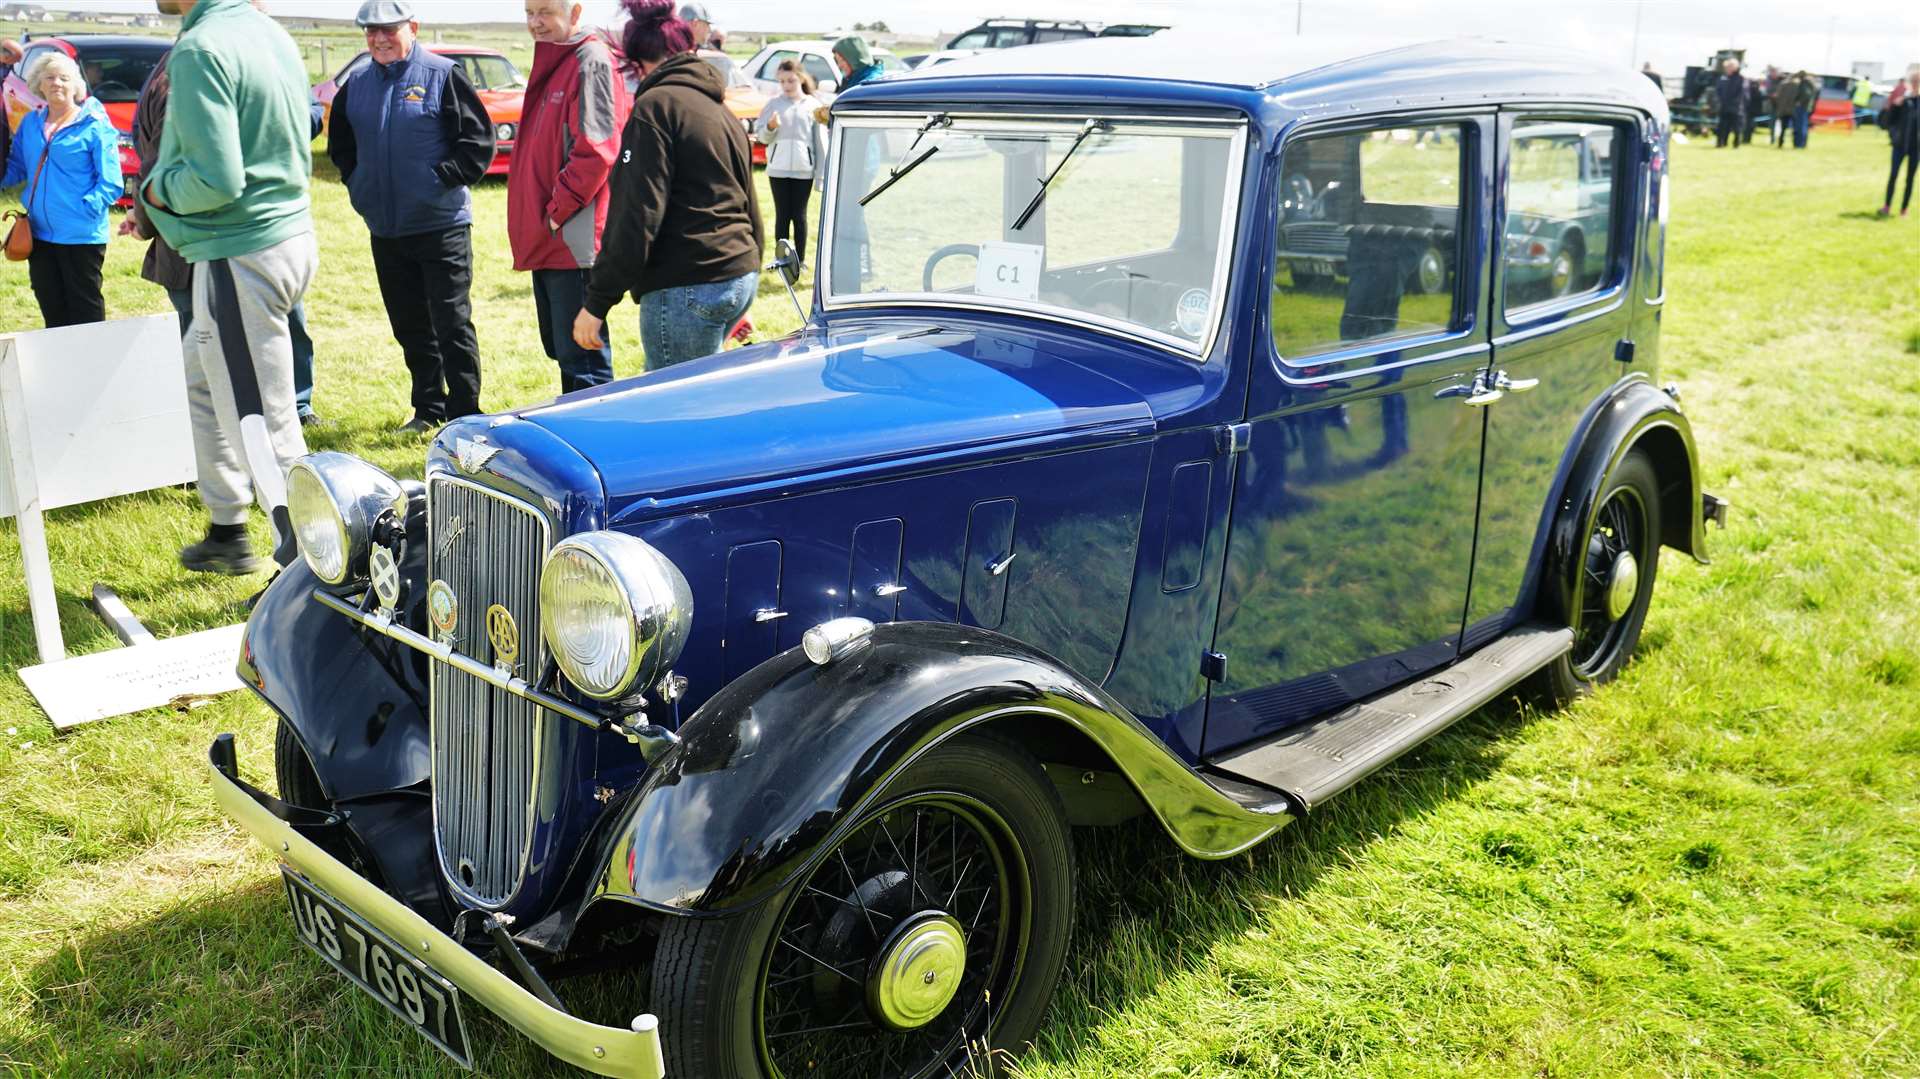 1934 Austin 10 owned by Terence Almond from Latheron won third place in its class. Picture: DGS